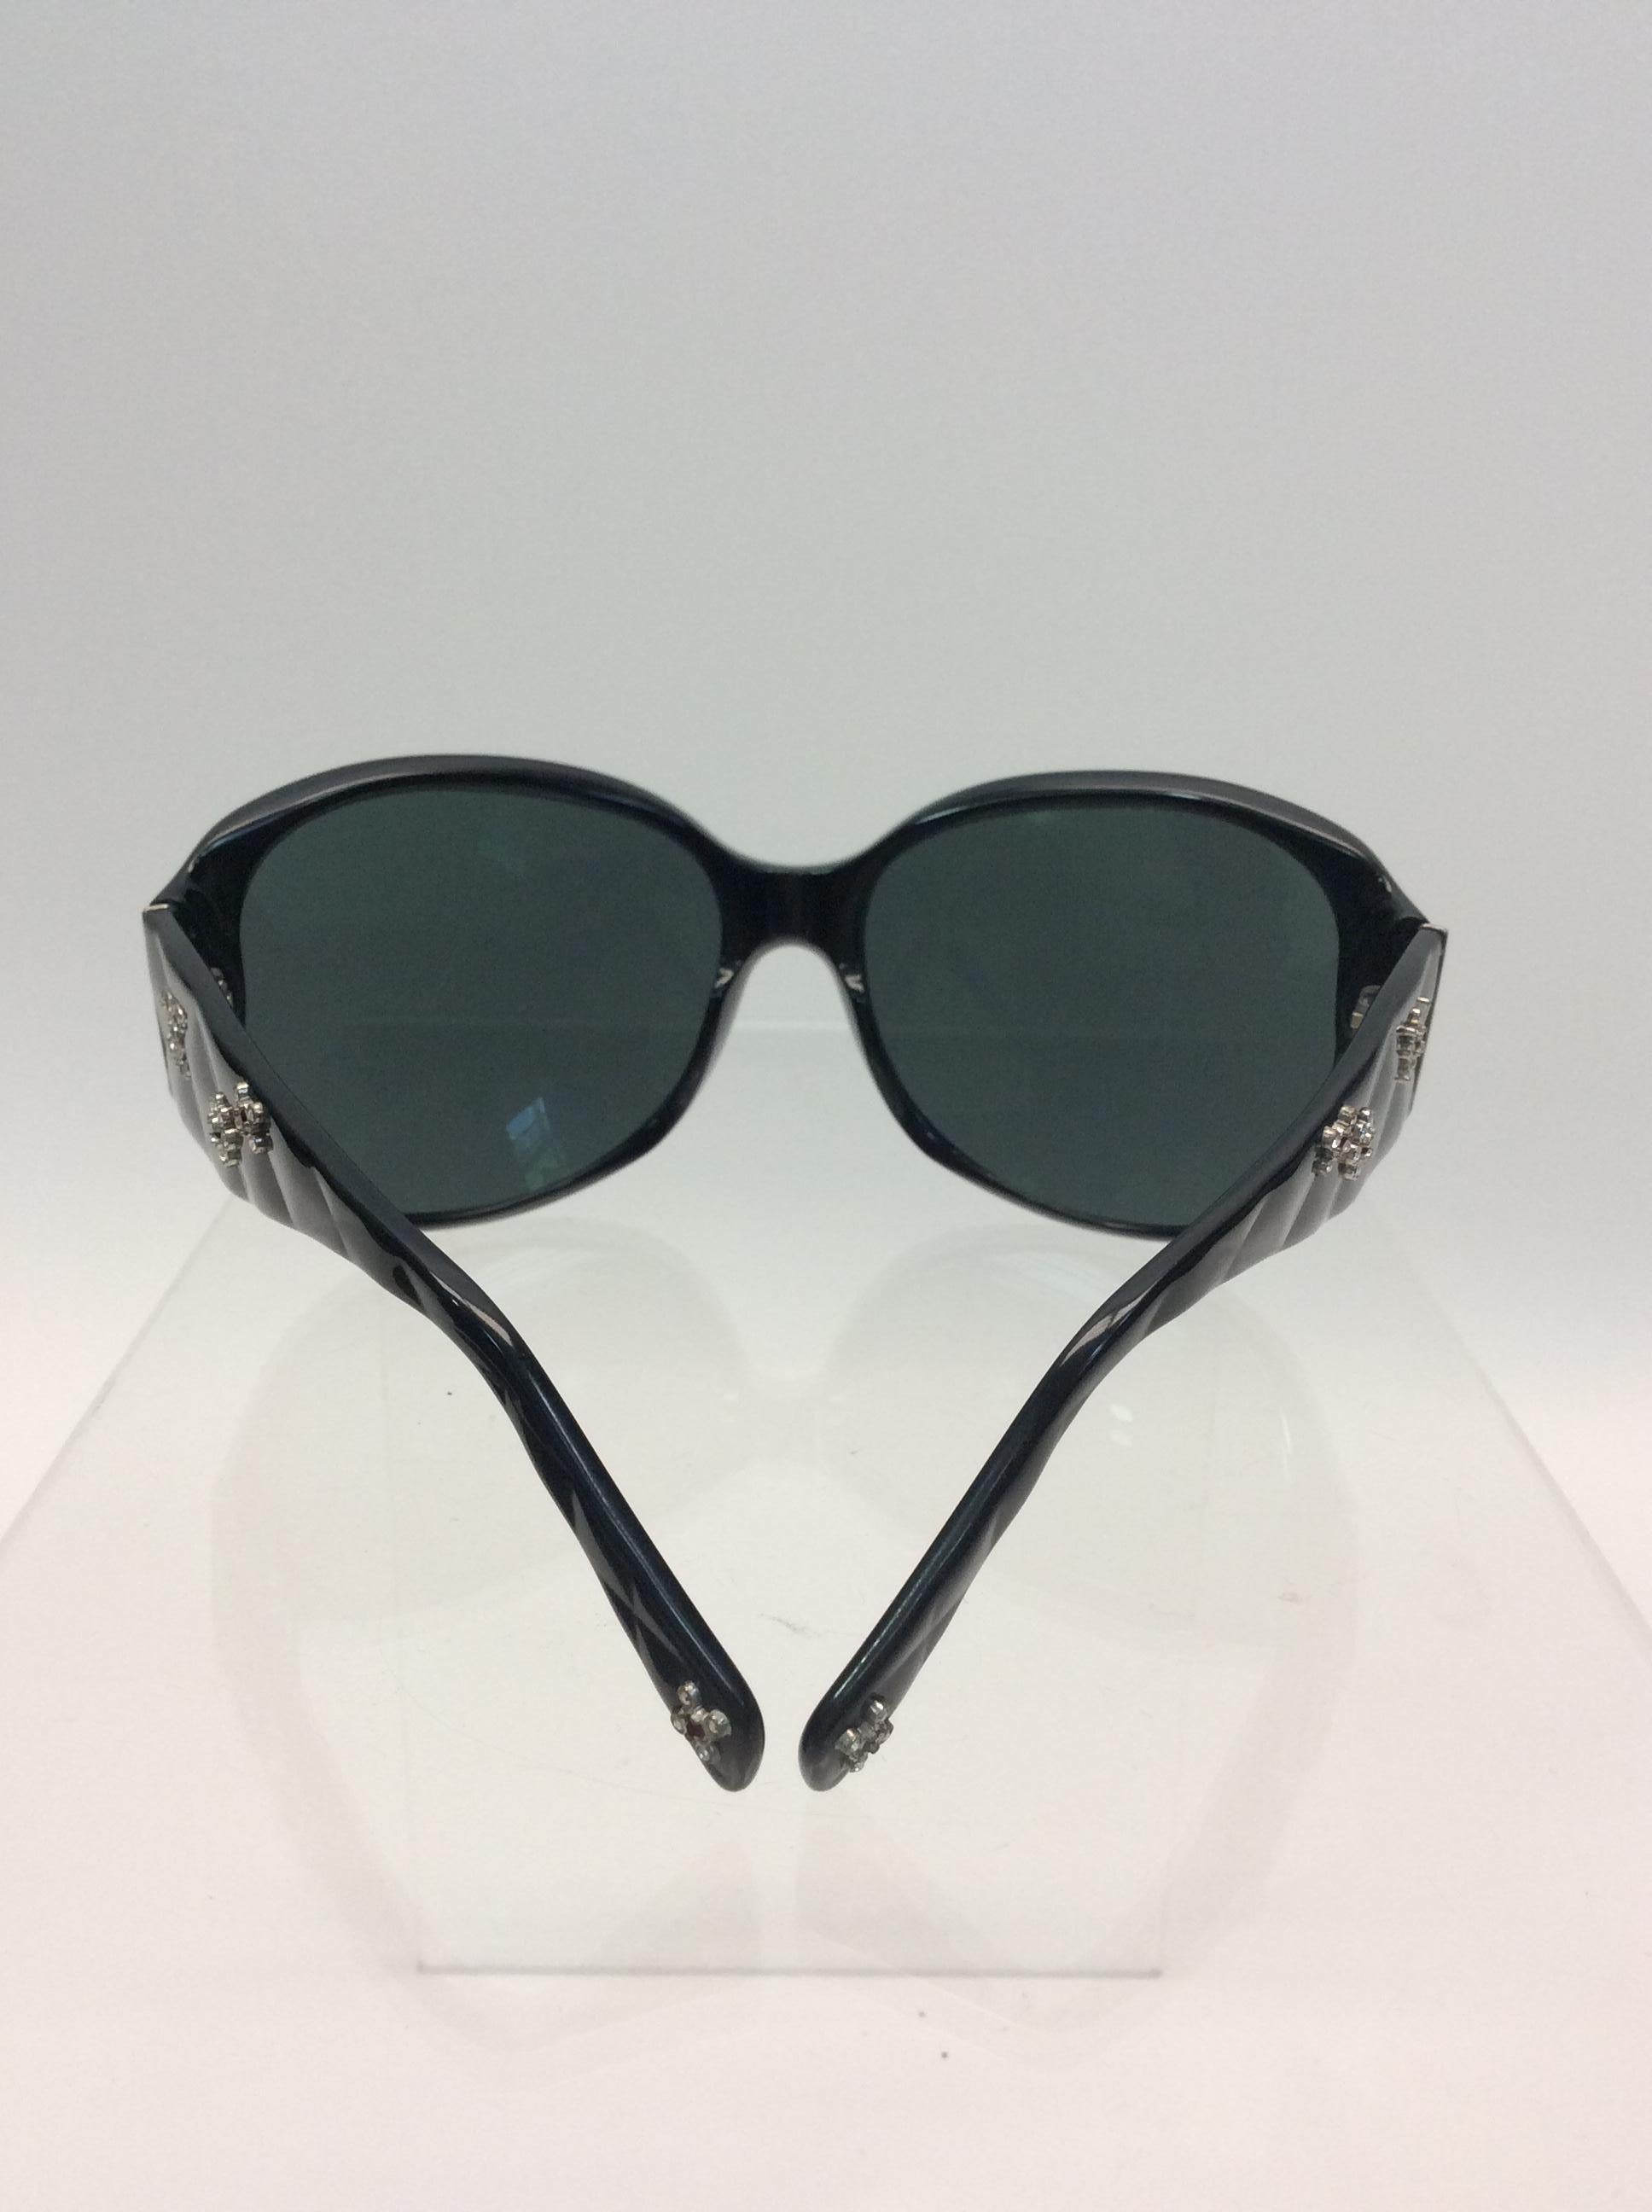 Chanel Black Studded Sunglasses In Good Condition For Sale In Narberth, PA